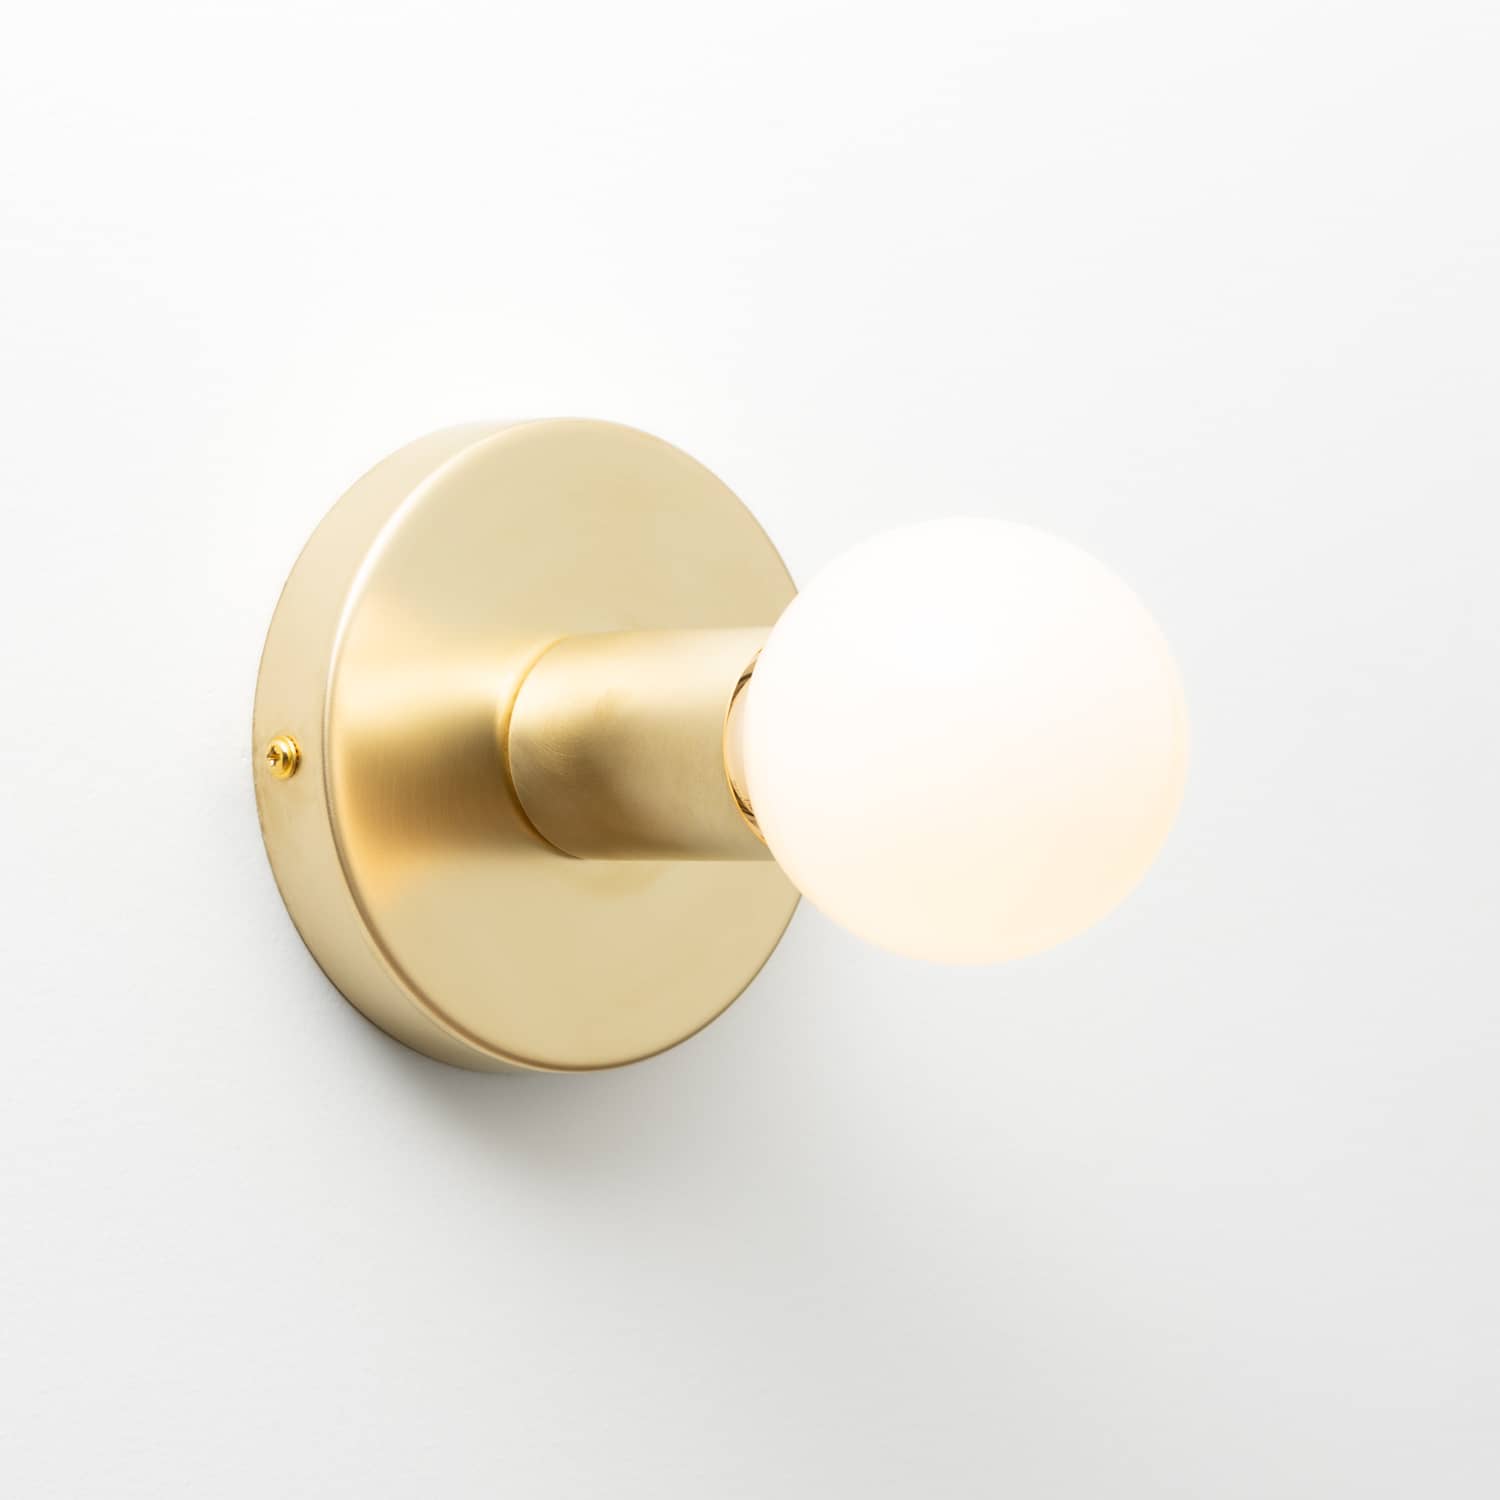 Button Light in Raw Brass finish. Pictured with a G25 milk glass light bulb